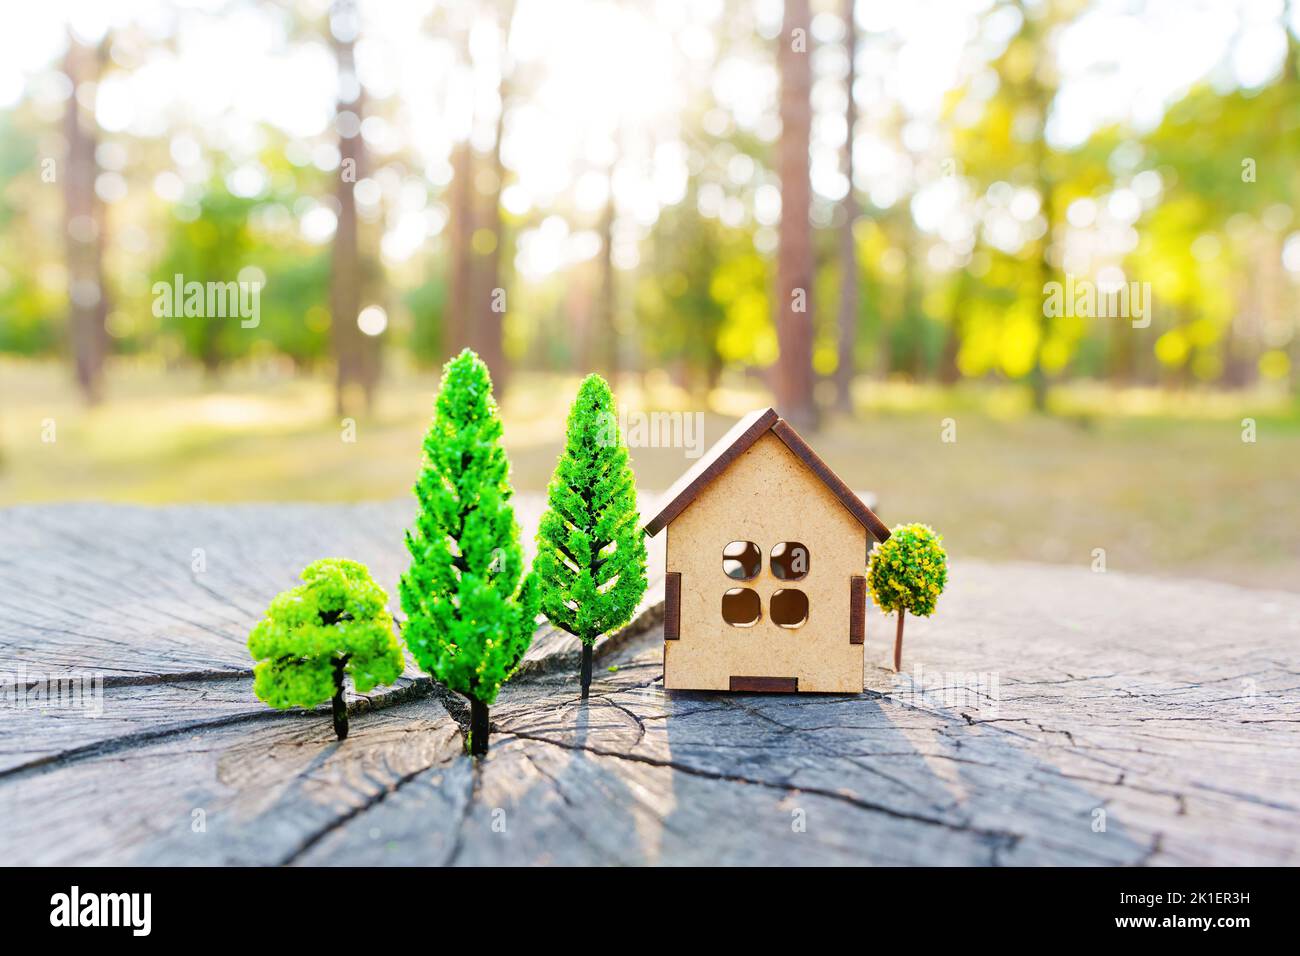 Toy miniature house model and trees placed on a tree stump in the woods. Creative countryside real estate concept. Stock Photo